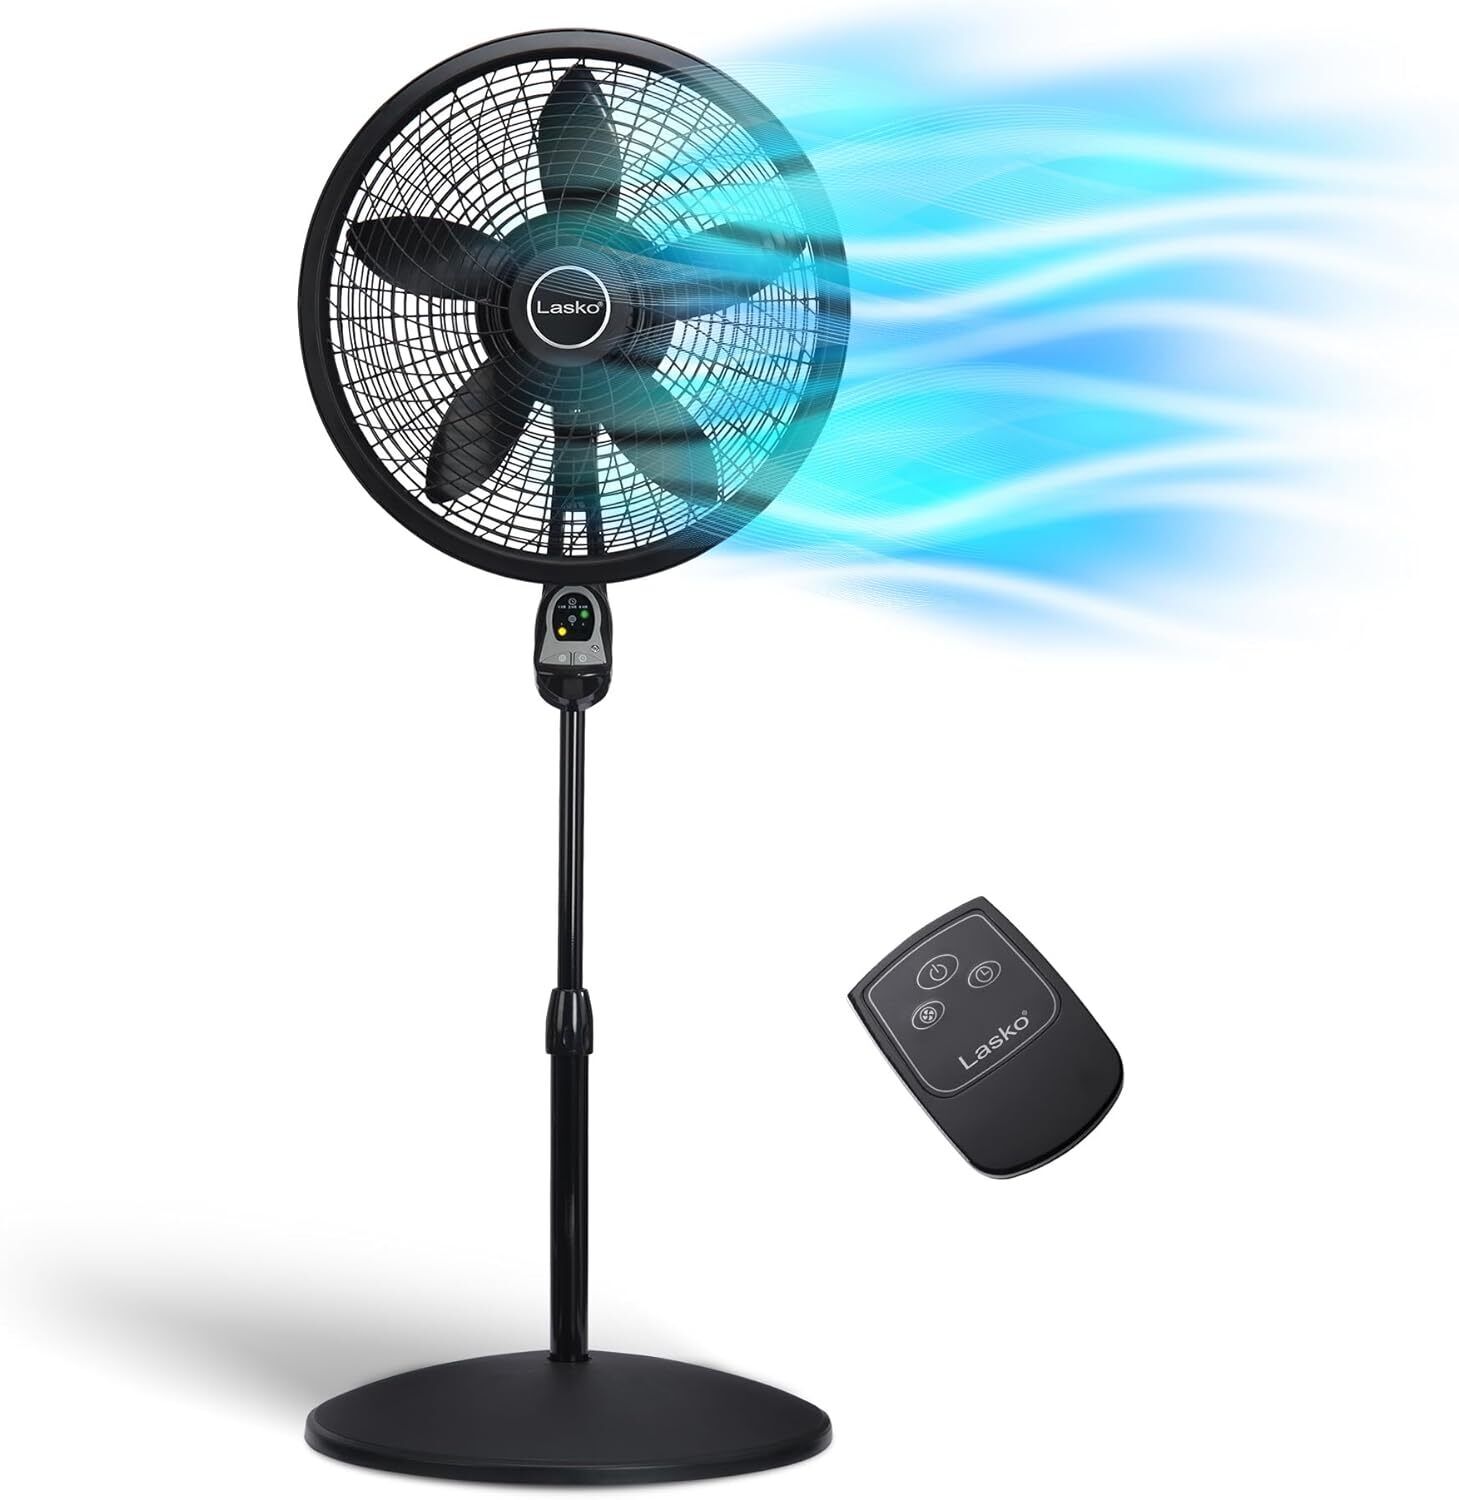 Oscillating Cyclone Pedestal Fan,Adjustable Height,Timer,Remote Control,3 Speeds